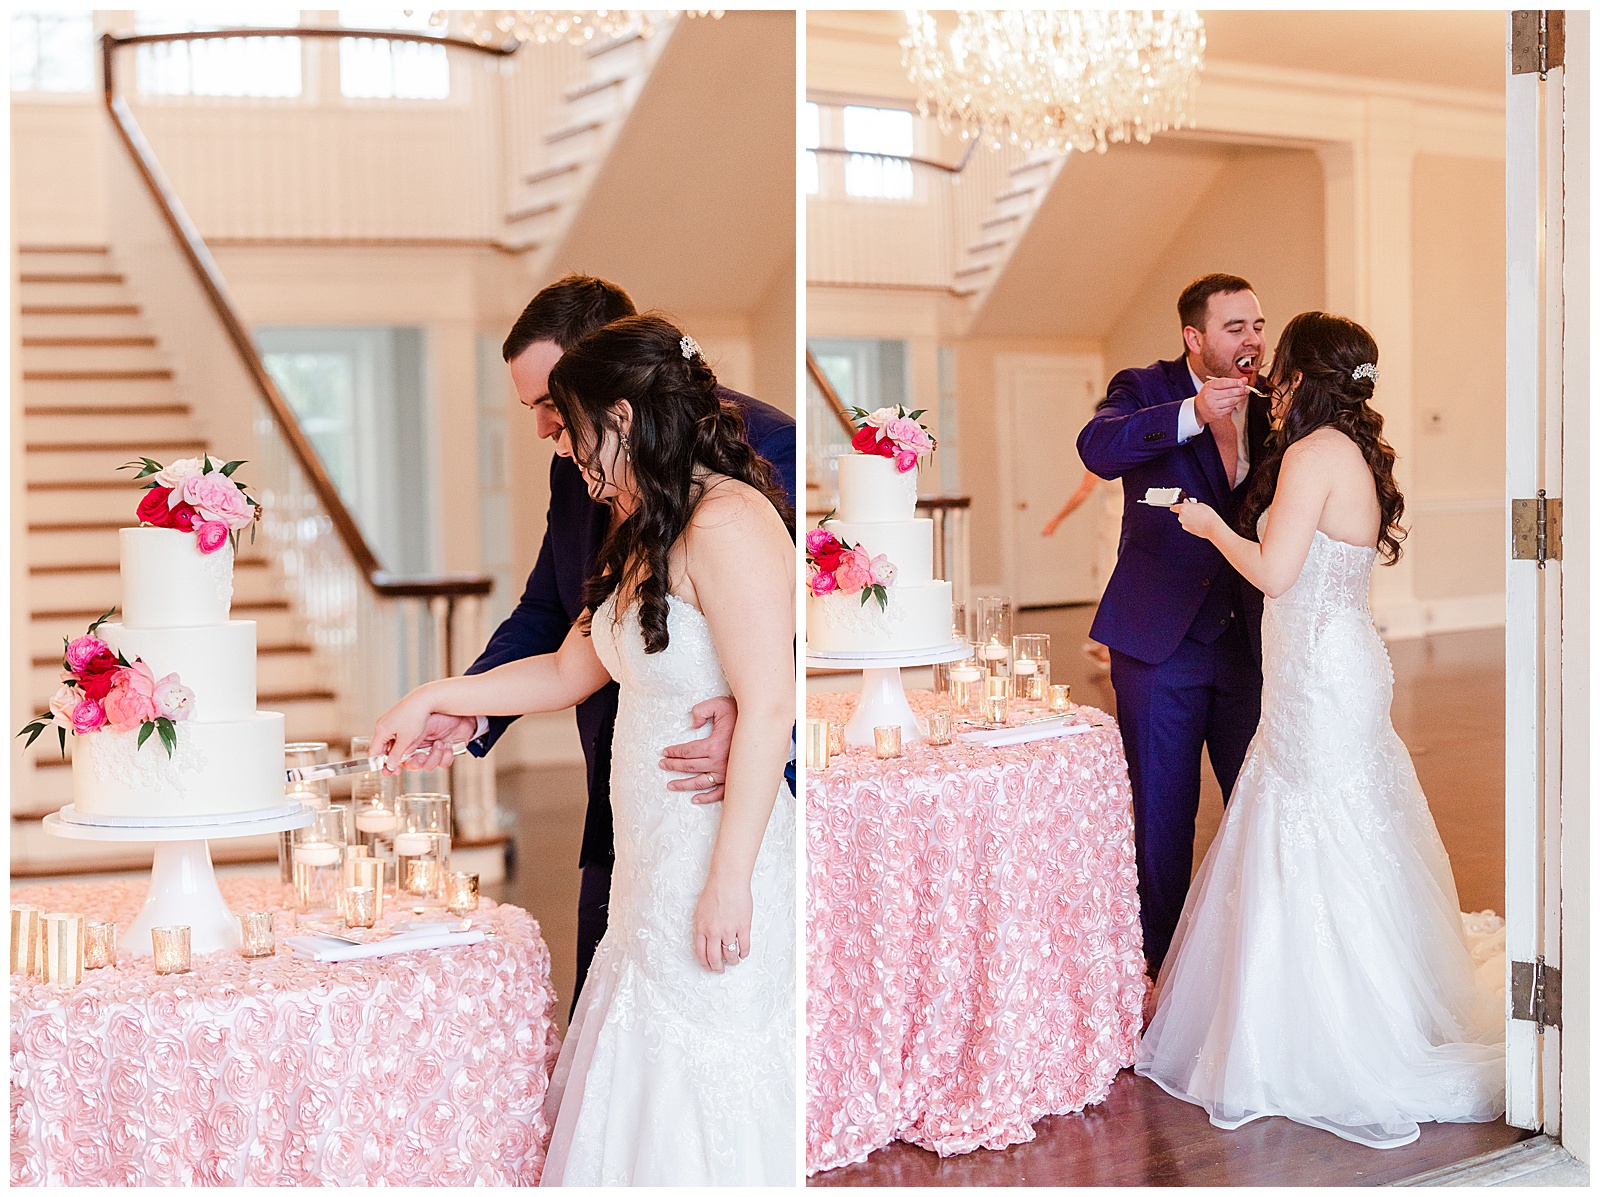 Gorgeous Soft Pink Color Theme Cake from Light and Airy Outdoor Wedding at Separk Mansion in Gastonia, NC | Kevyn Dixon Photography